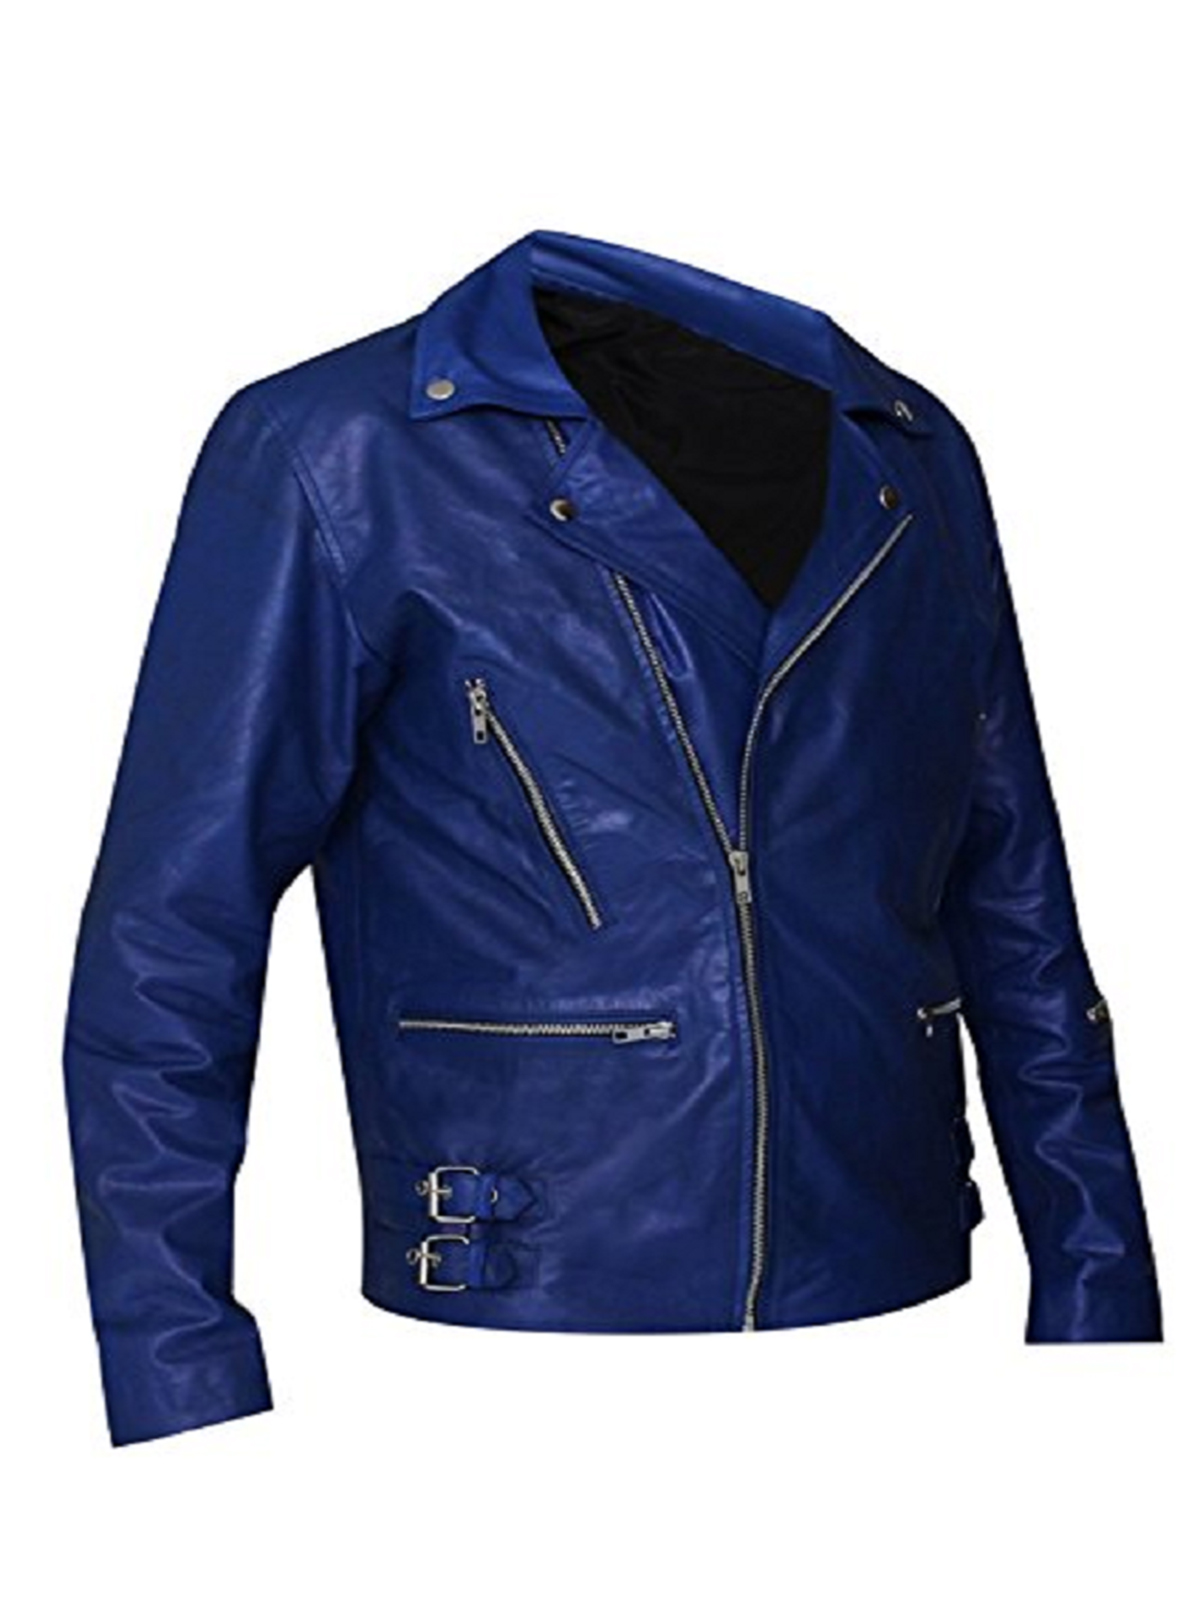 Jared Leto 30 Seconds to Mars Blue Leather Jacket – Bay Perfect